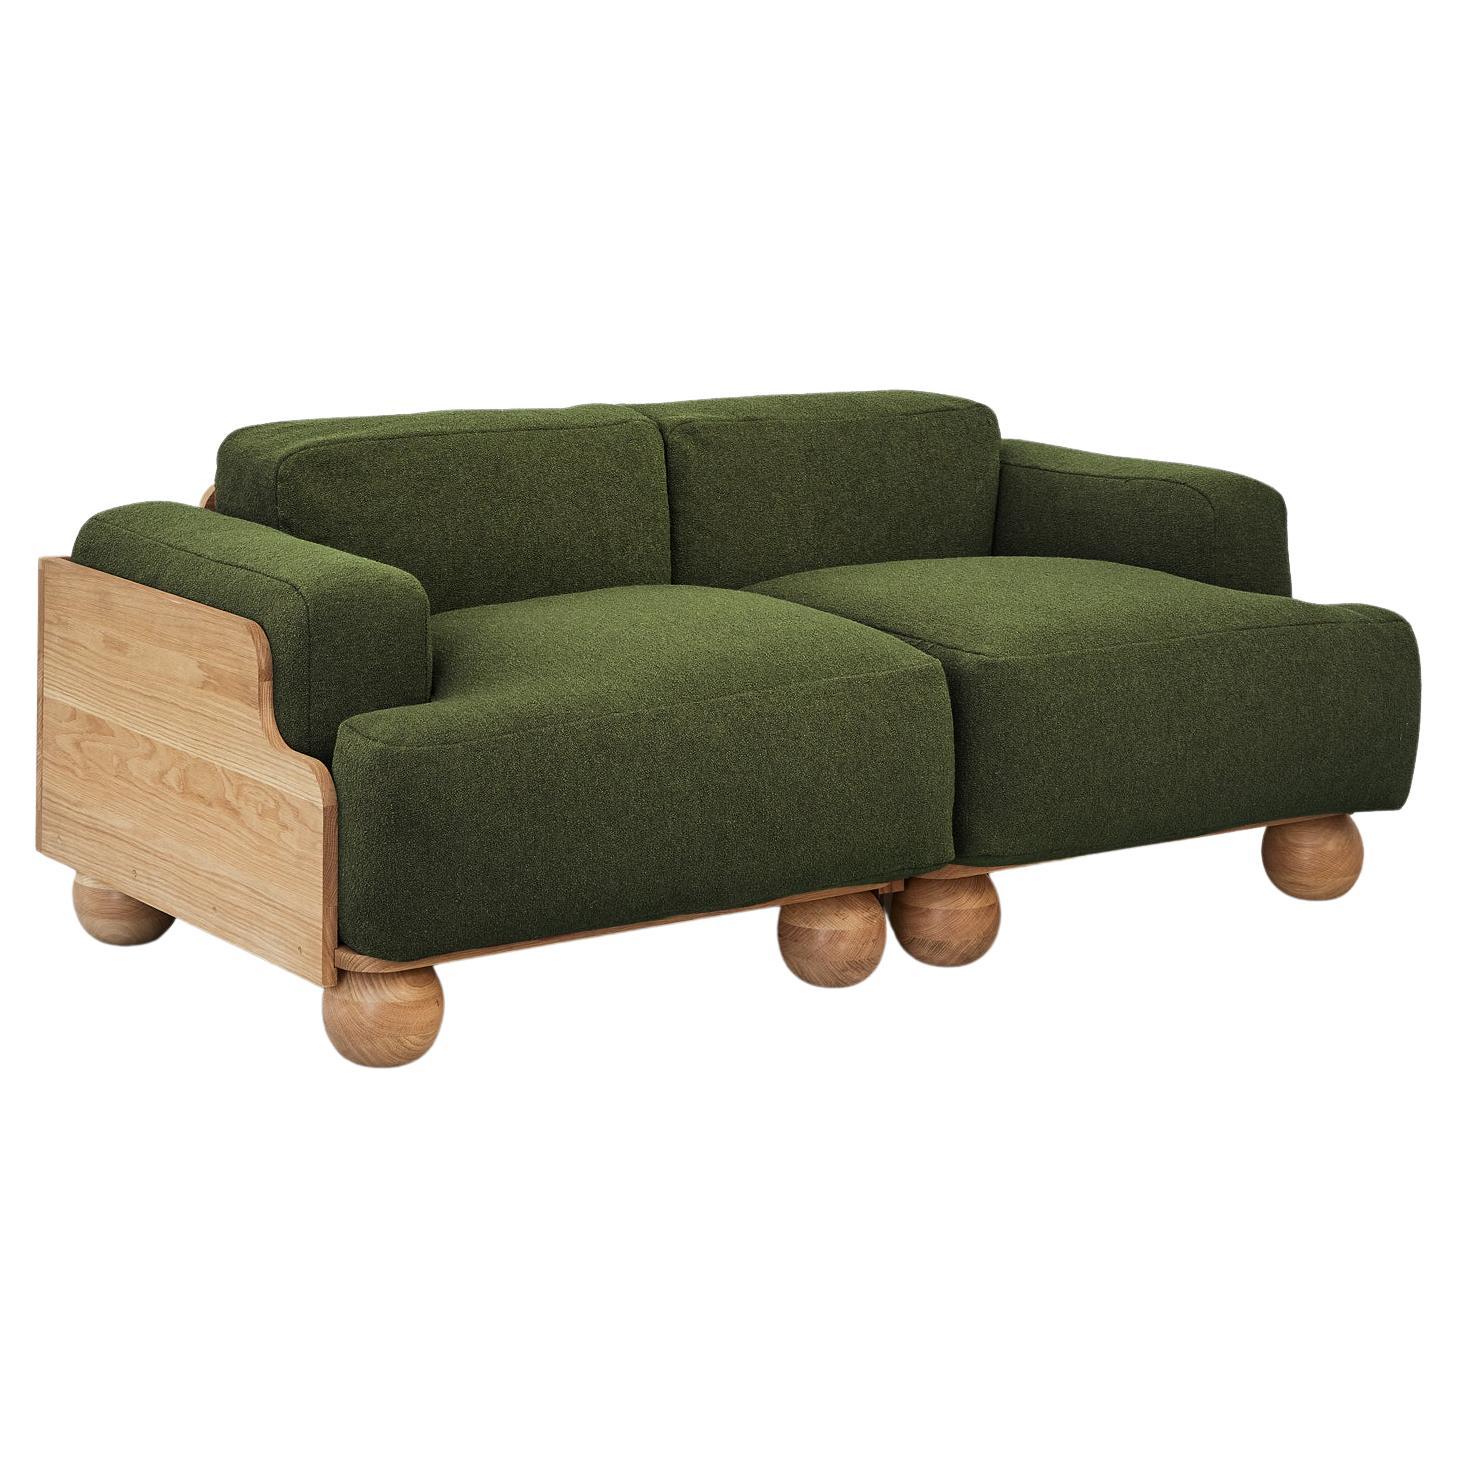 Cove 2.5 Seater Sofa in Woodland Green